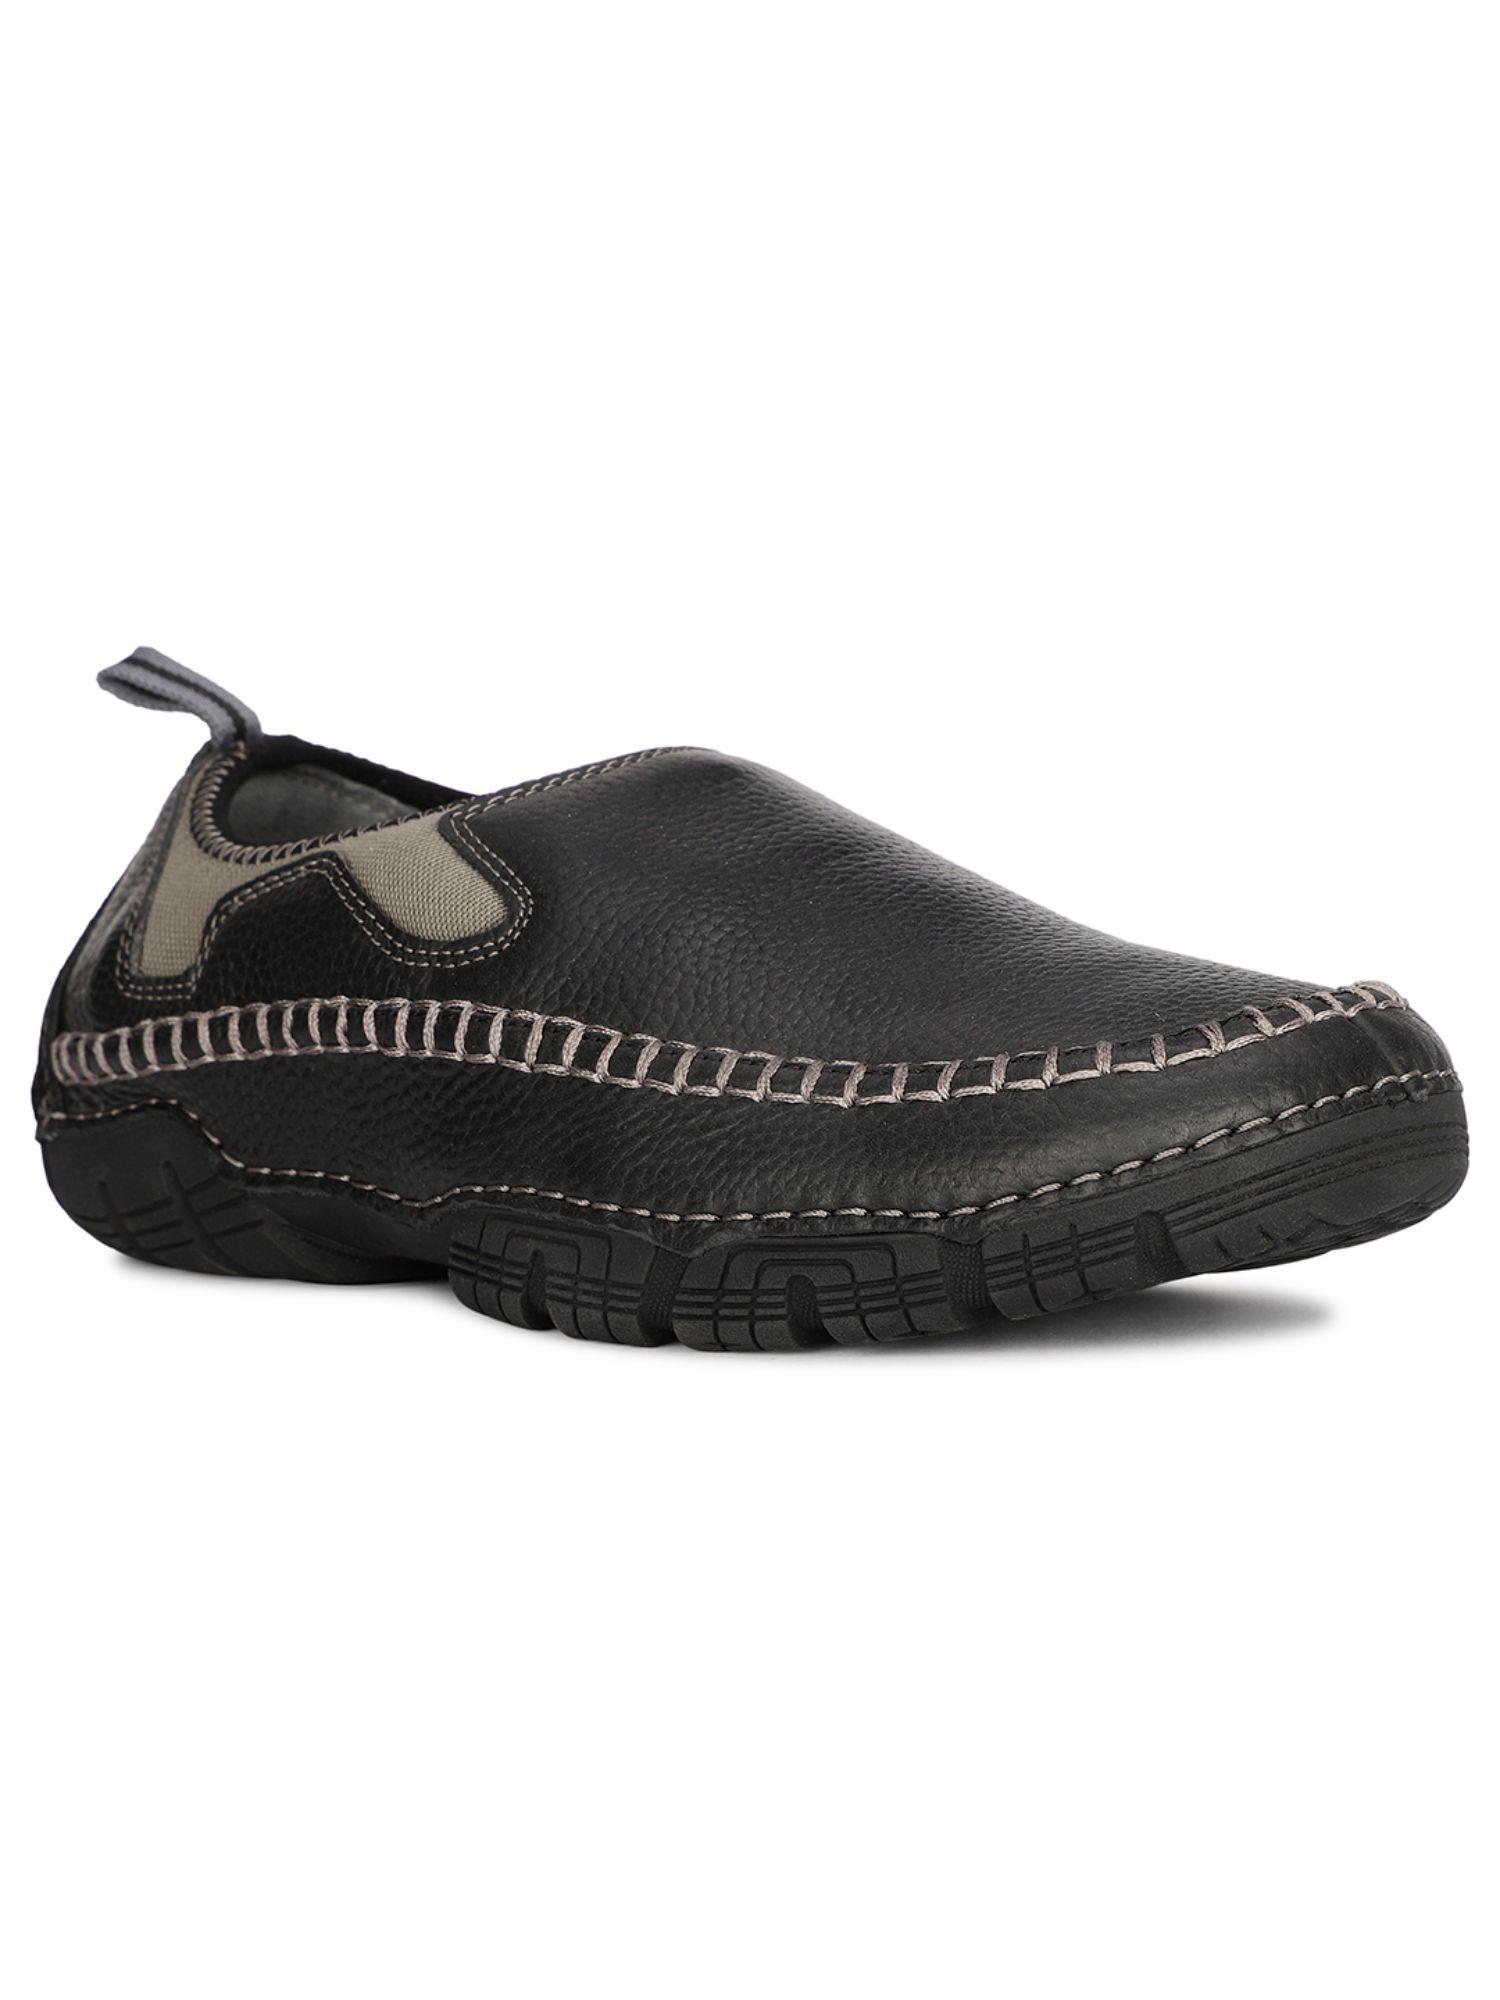 mens-black-slip-on-casual-loafers